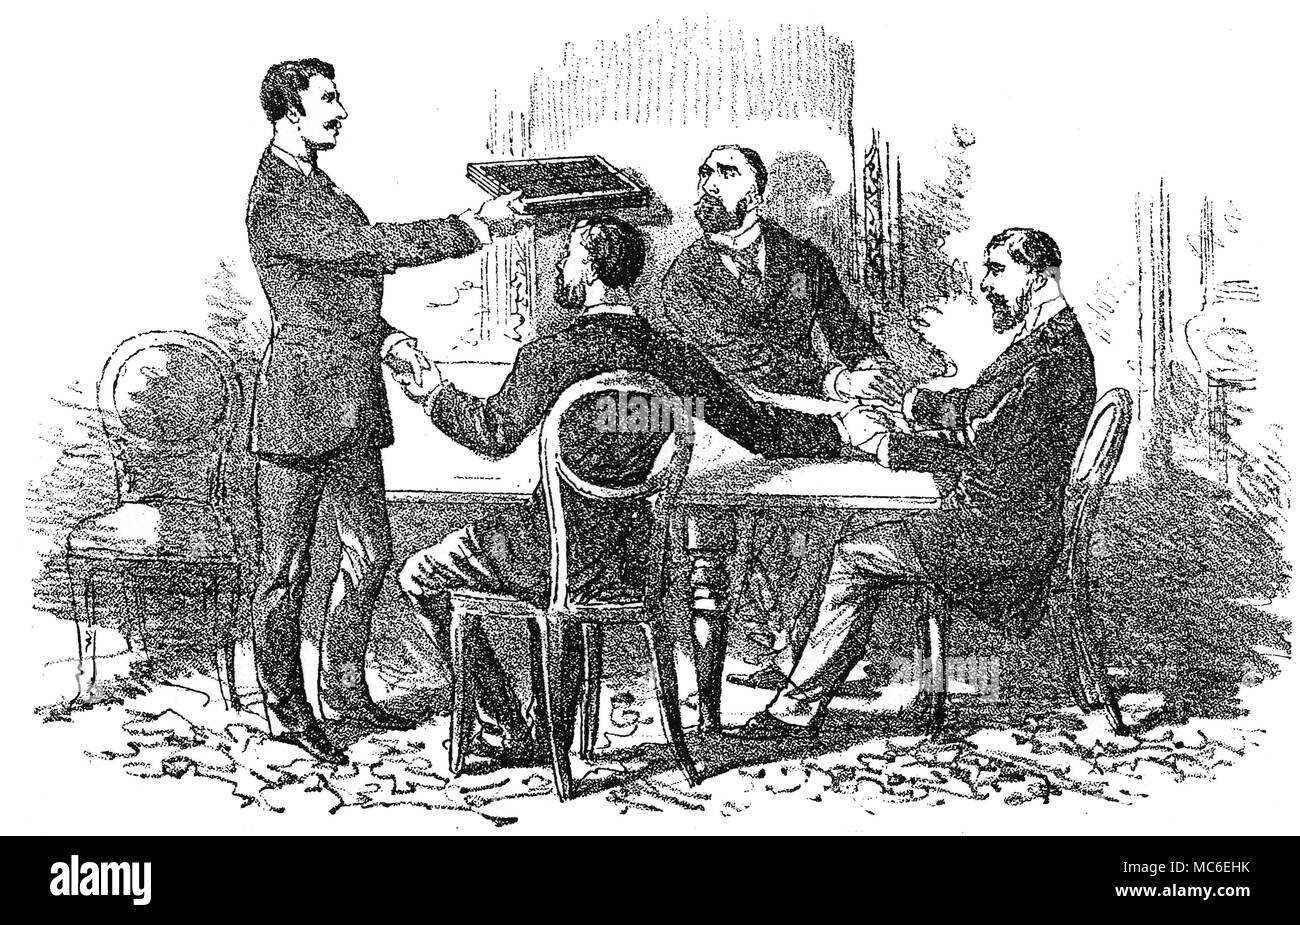 SPIRITUALISM, SEANCES AND SLATE WRITING - EGLINGTON Lithograph showing the method of obtaining spirit writing on two slates, held over the sÃšance table. 'The actual production of the (spirit) writing without visible agency has also been witnessed', and in almost every case the sound of writing being done by an invisible agency is heard during the sÃšances. From John S. Farmer, Twixt Two Worlds. A Narrative of the Life and Work of William Eglington, 1886. Stock Photo